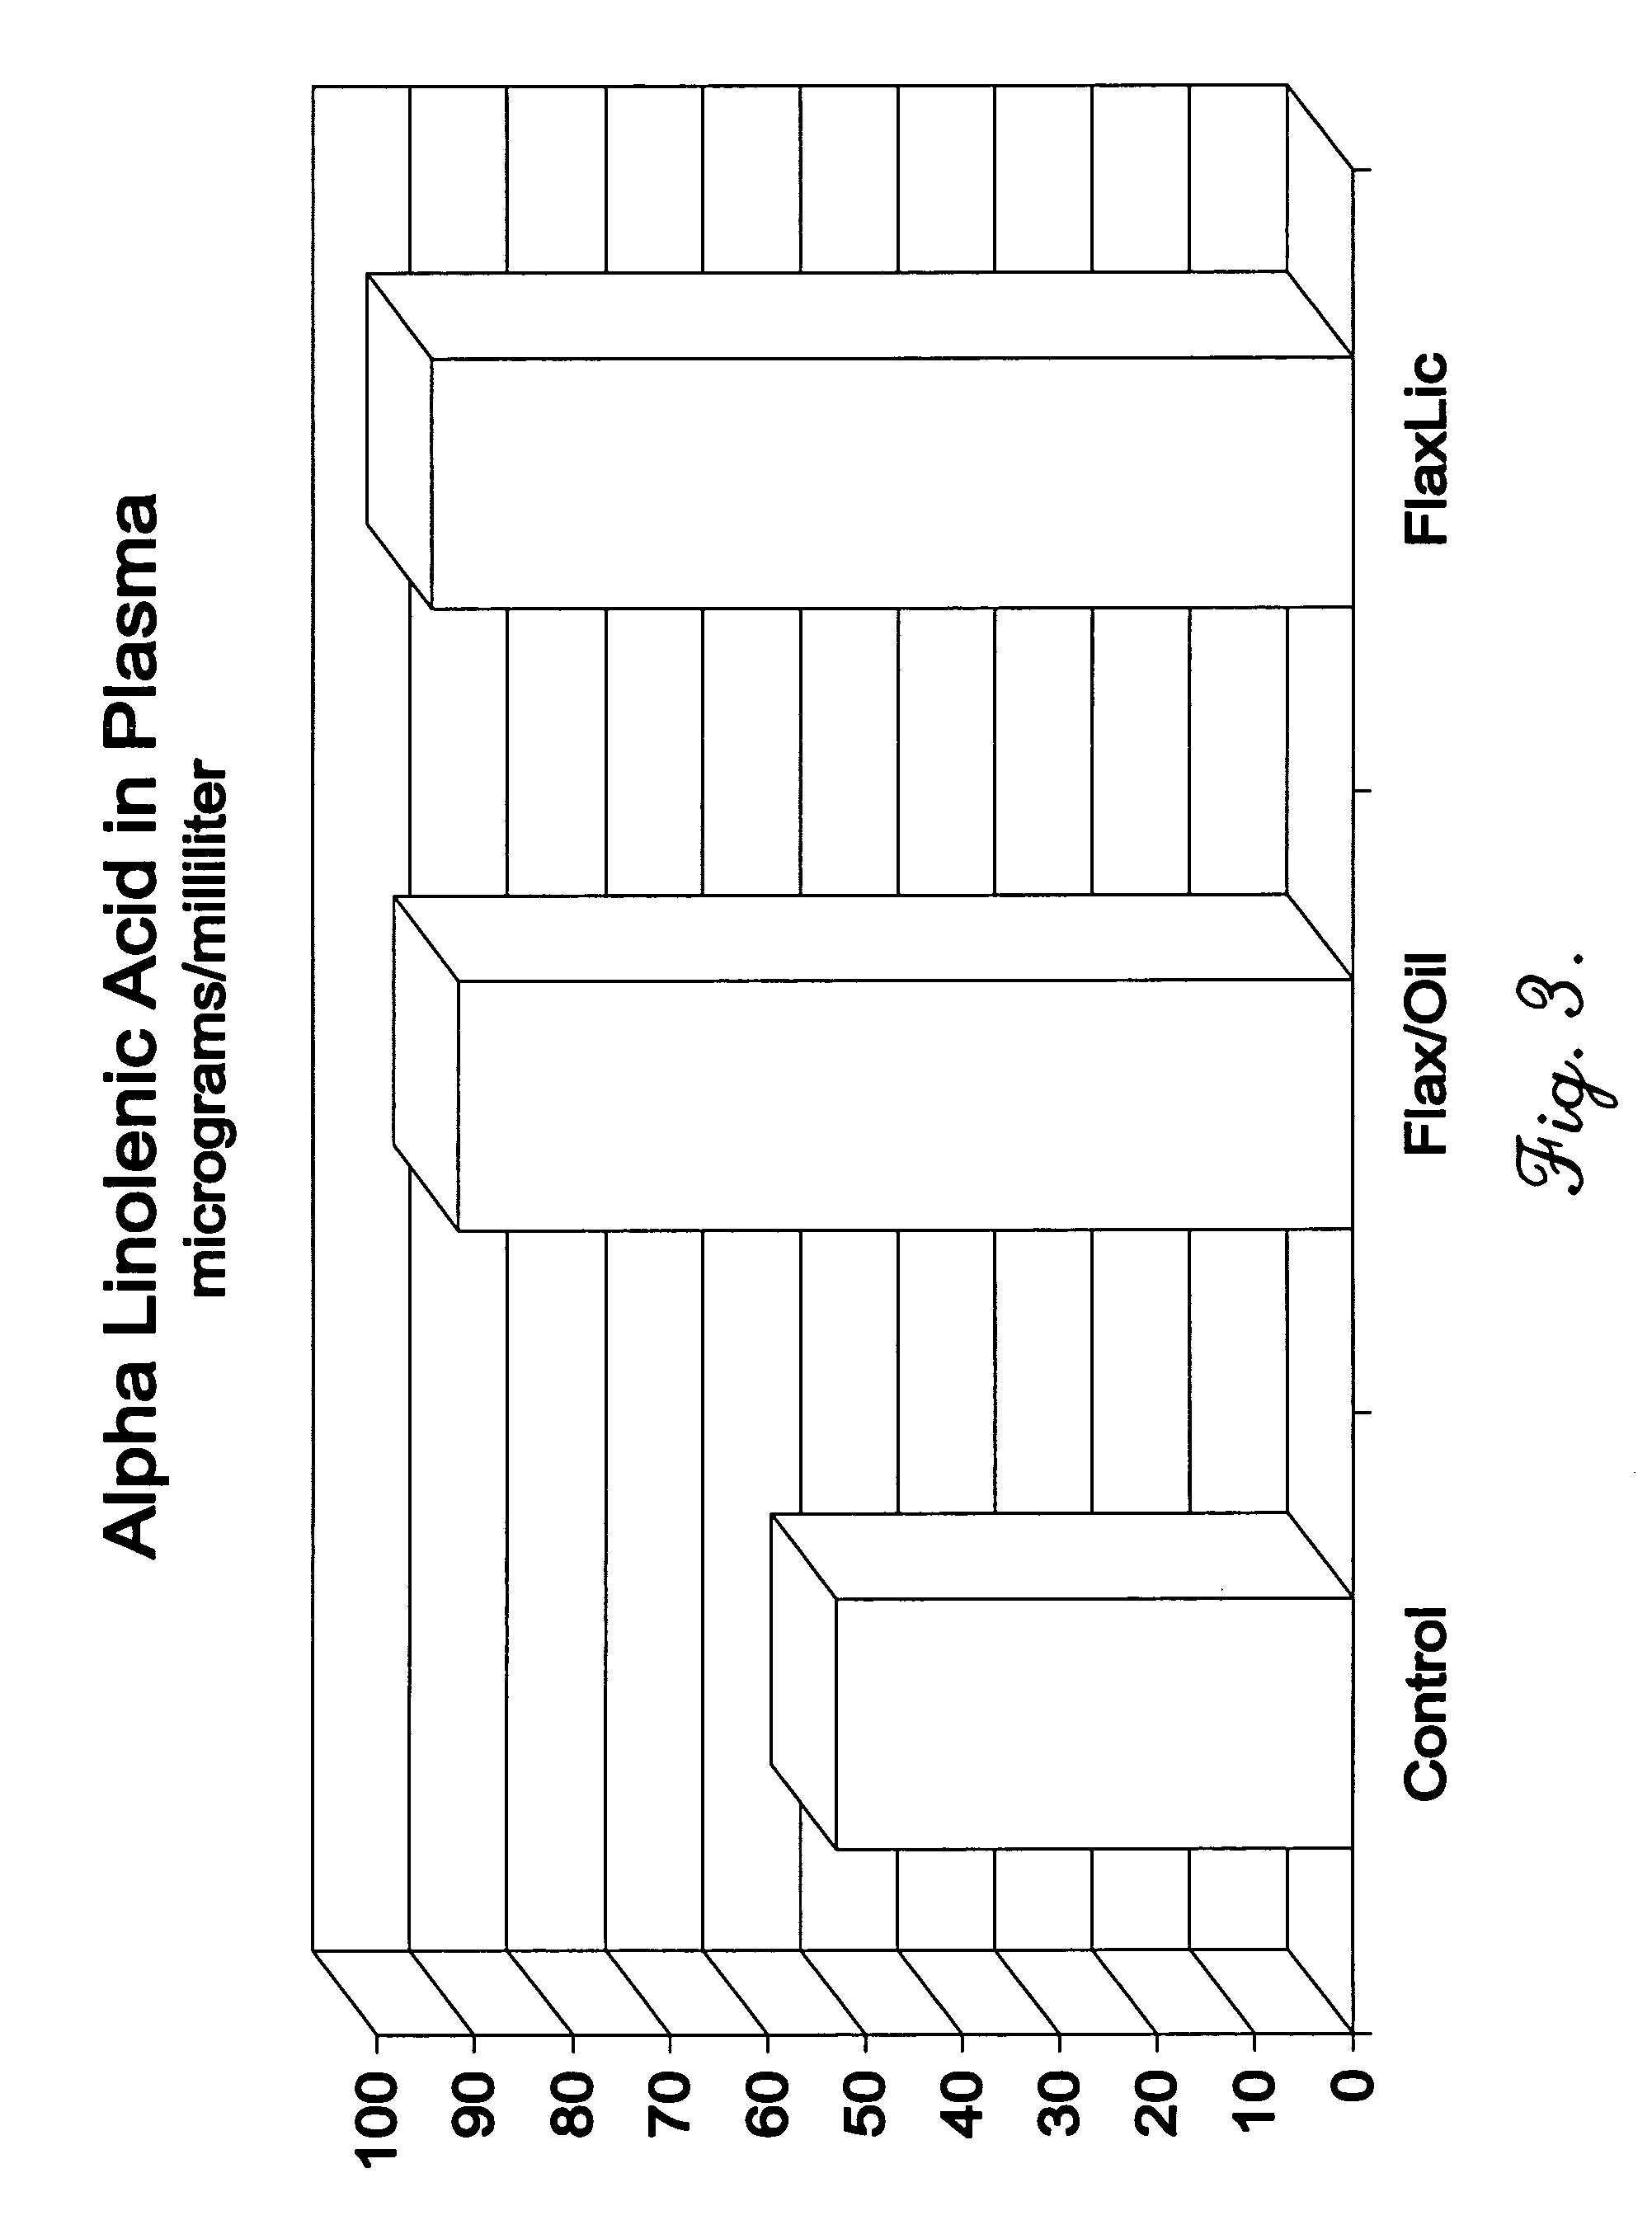 Product and process for elevating lipid blood levels in livestock